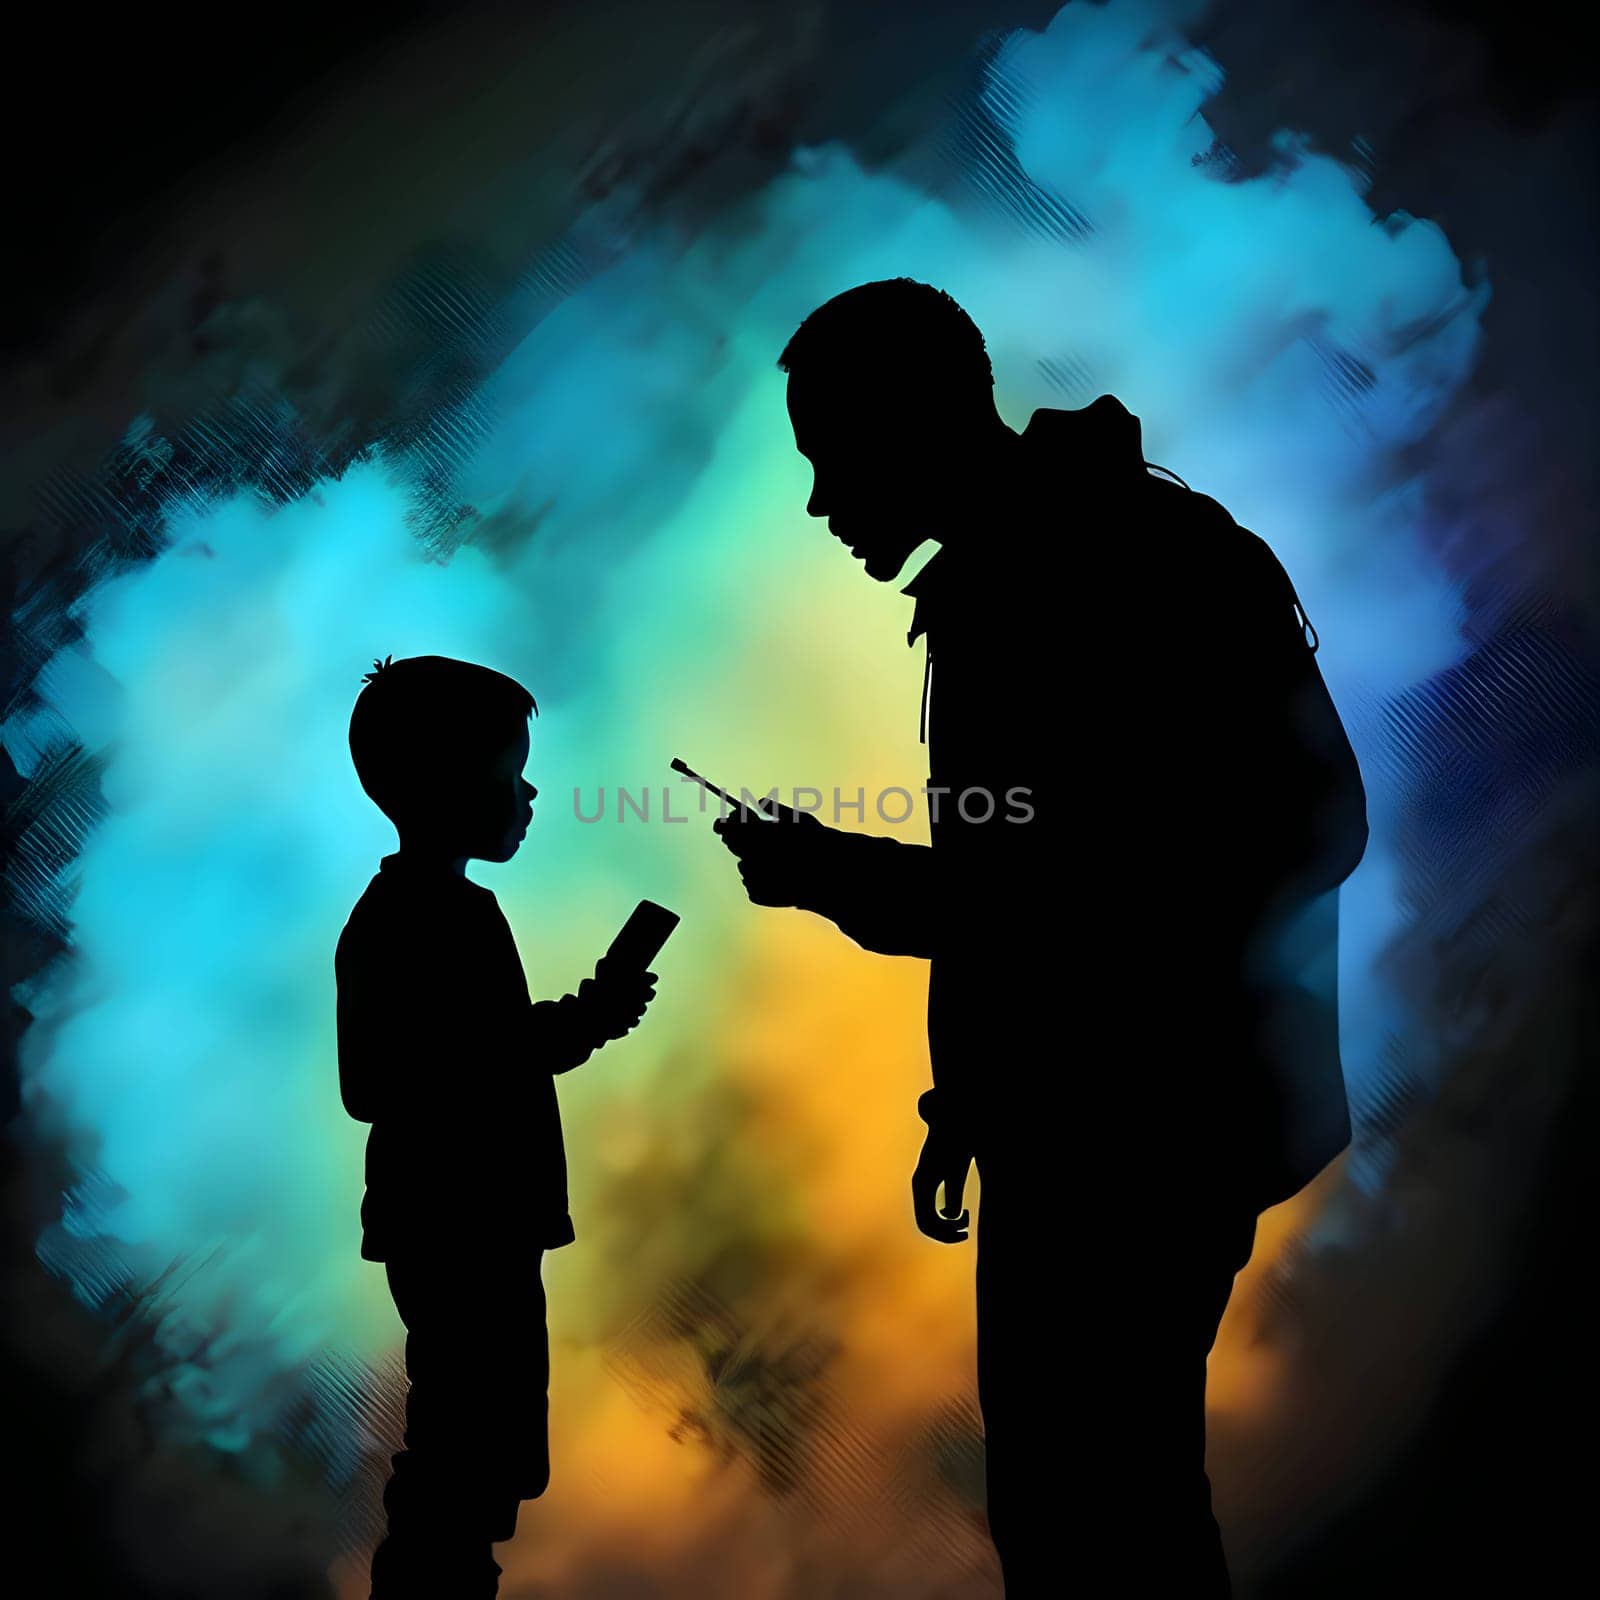 Vector illustration of a two boys in black silhouette against a clean colorful background, capturing graceful forms.